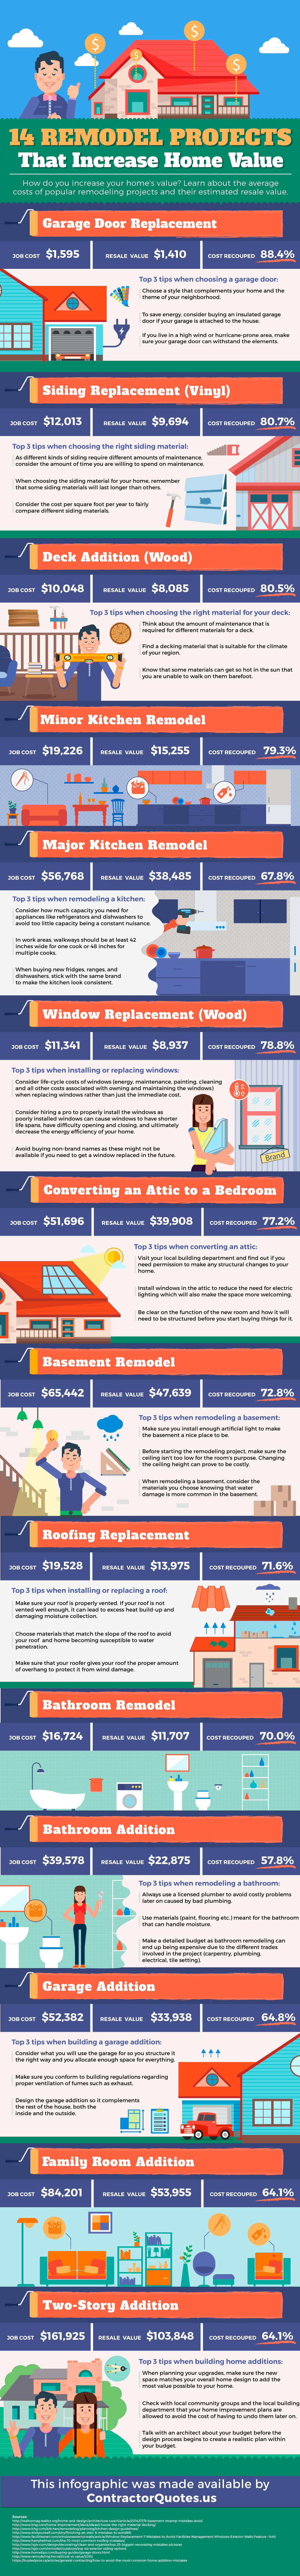 Remodeling-projects-that-increase-home-value-infographic